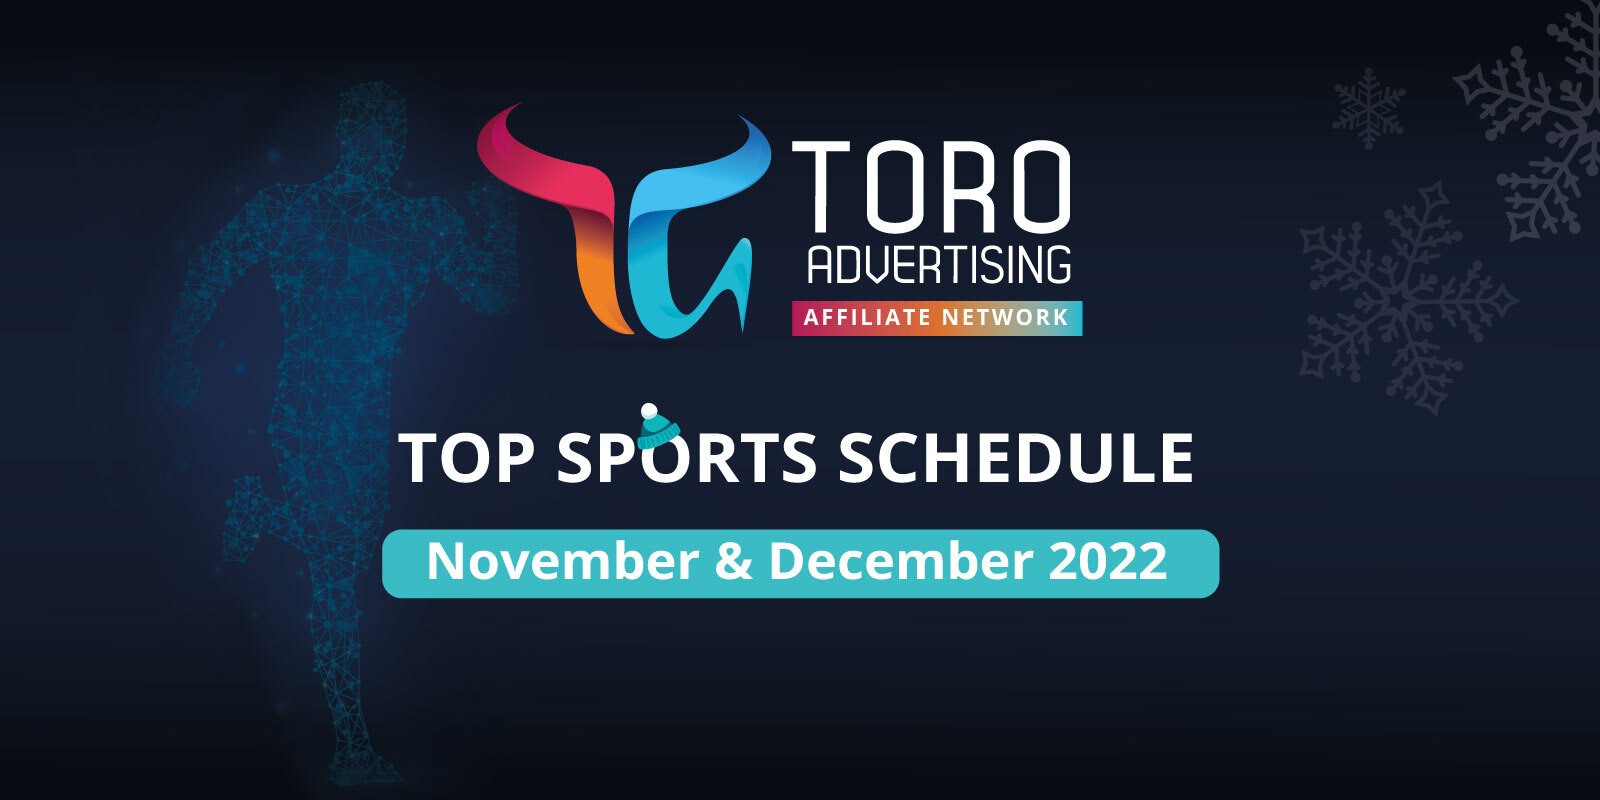 Top sports events 2022